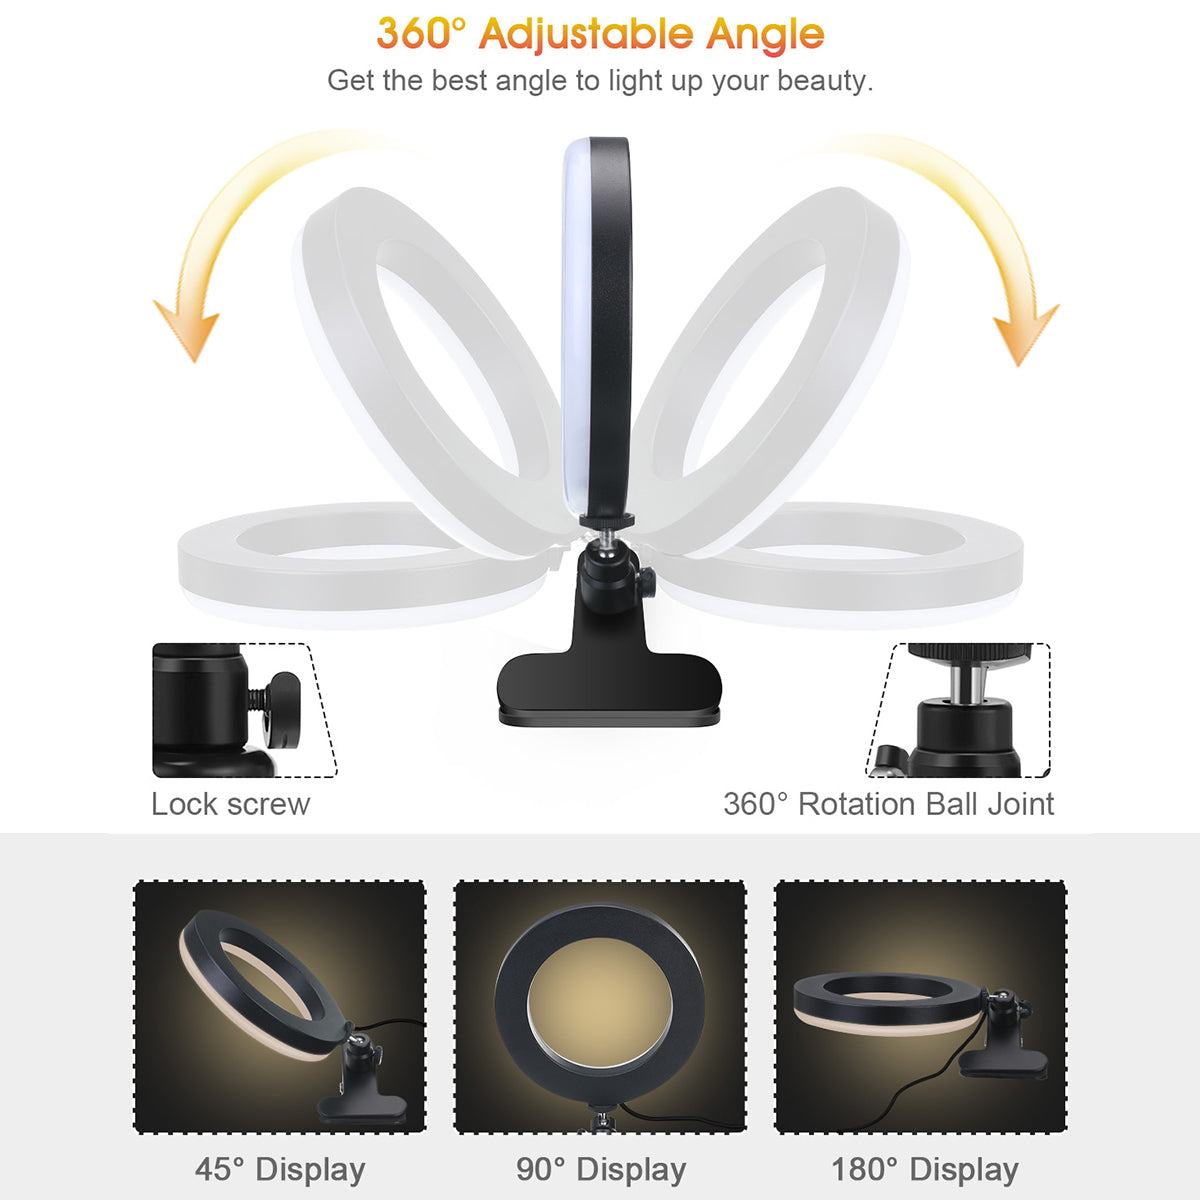 Five Segment Stretch For Wider Viewing Ring Light- Brightenlux